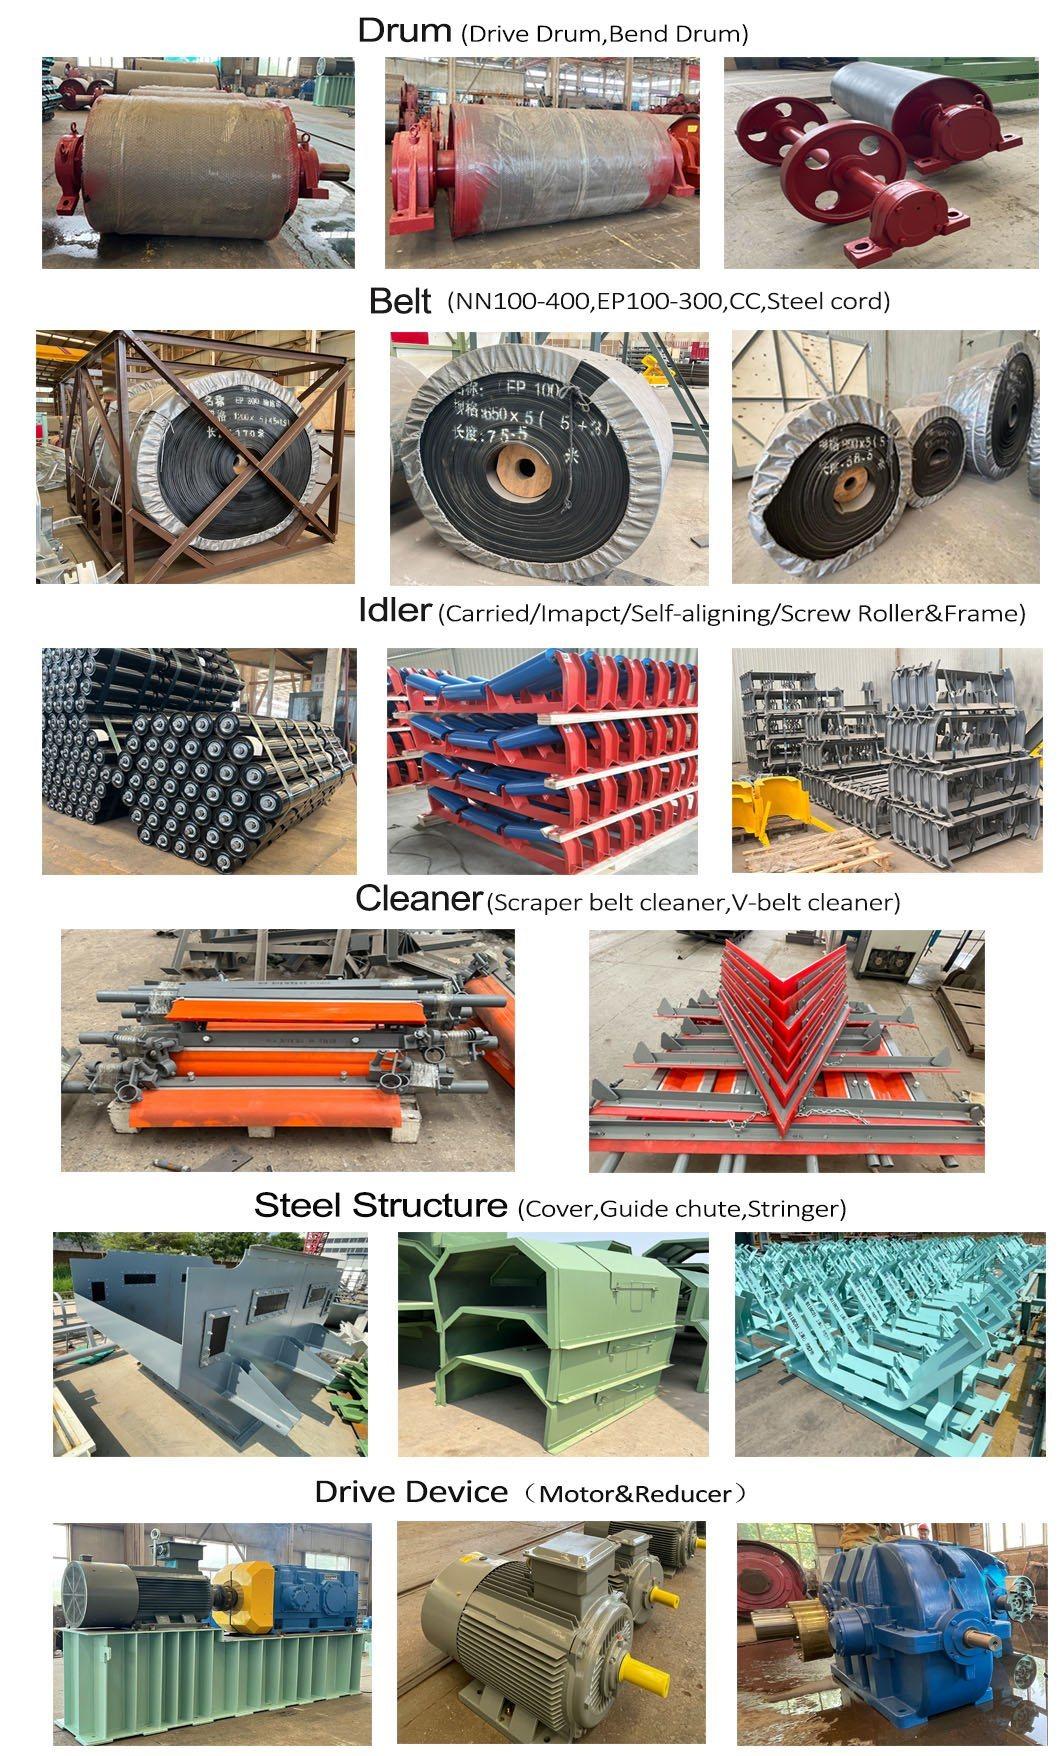 High Quality Long-Distance Belt Conveyor System for Mining/Power Plant/Cement/Port/Chemical